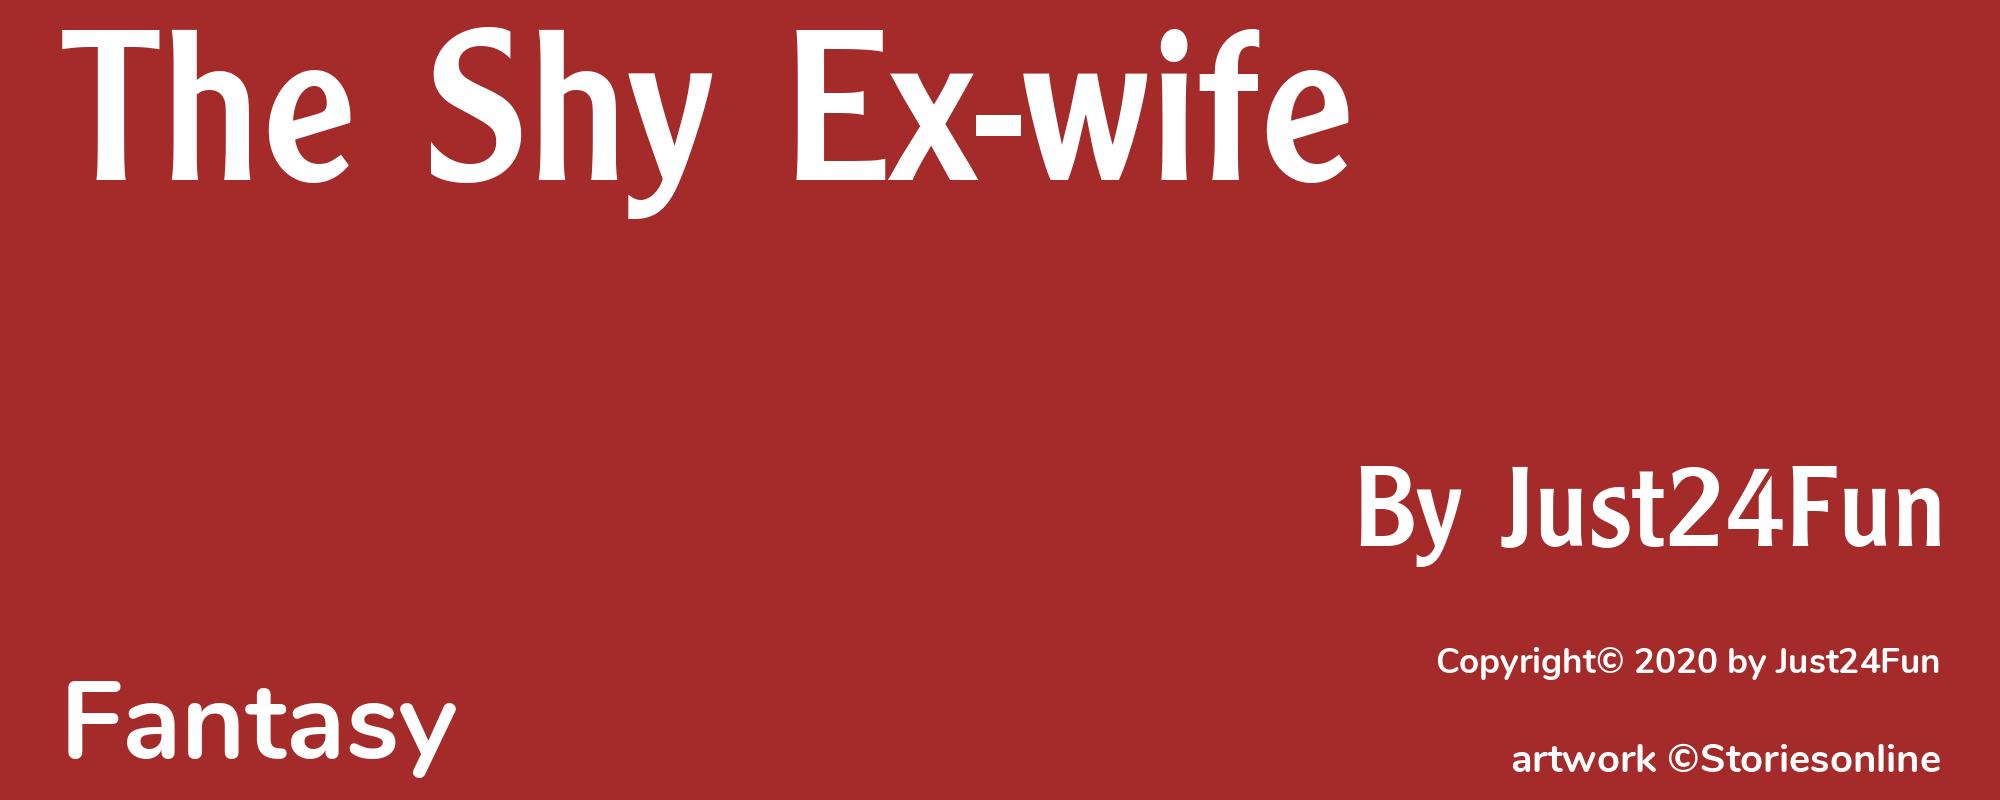 The Shy Ex-wife - Cover